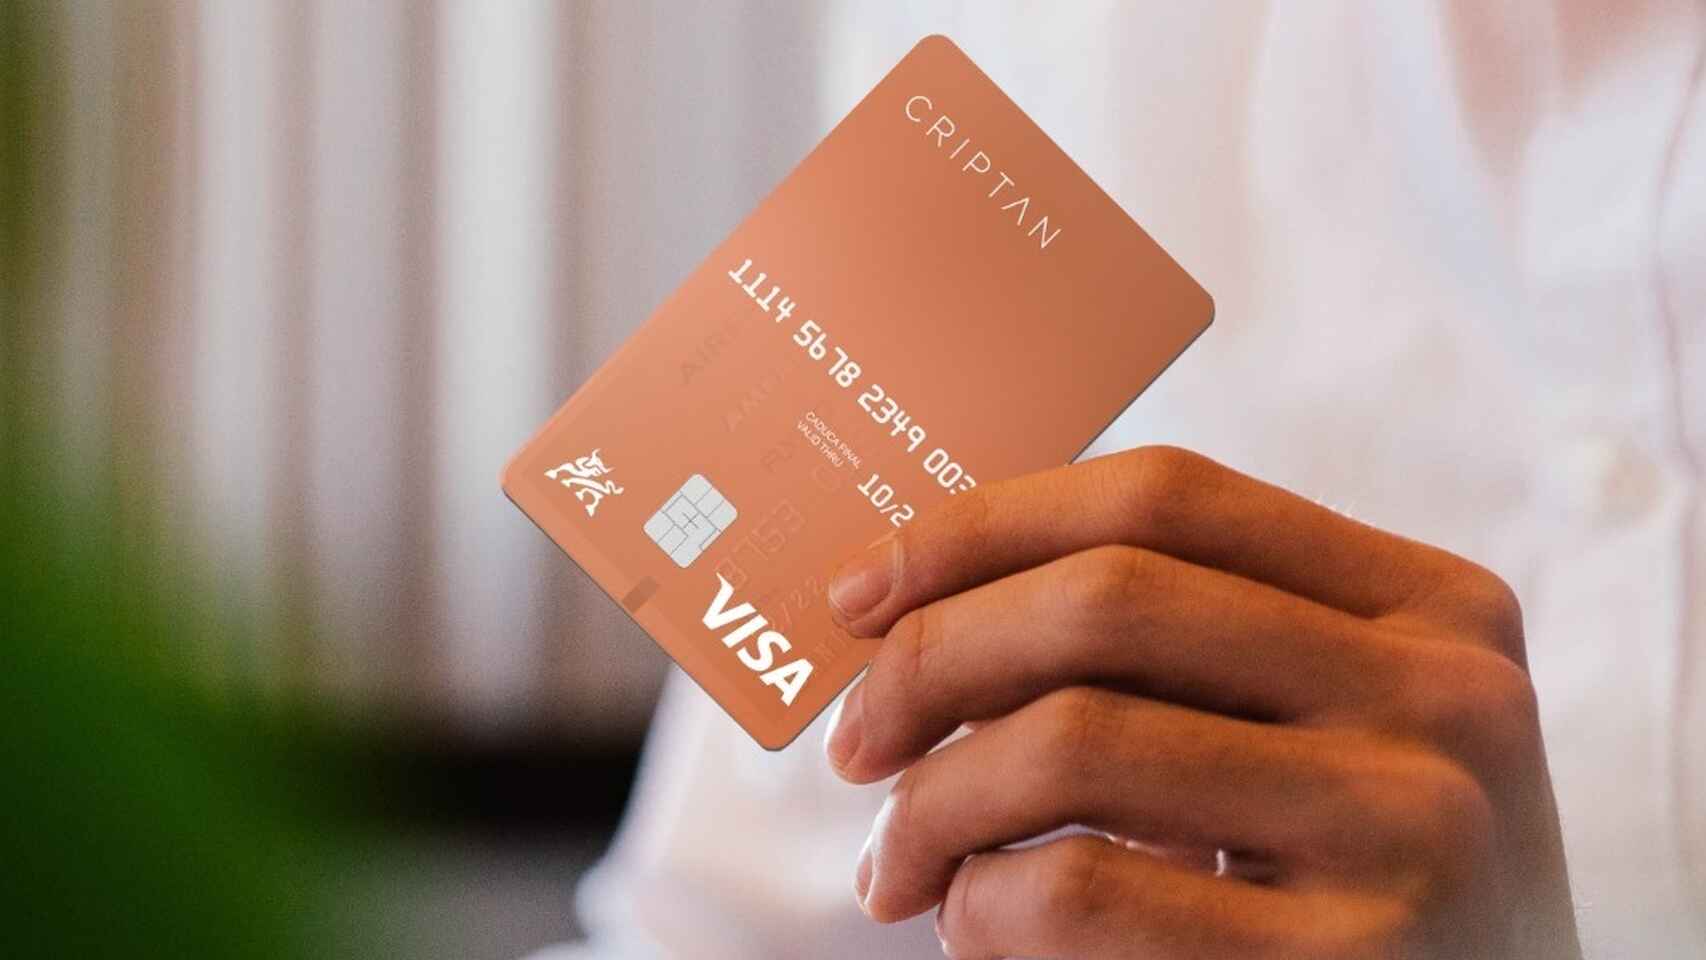 The crypto buying and selling platform focused on the Spanish market has just made its first physical Visa card available to customers